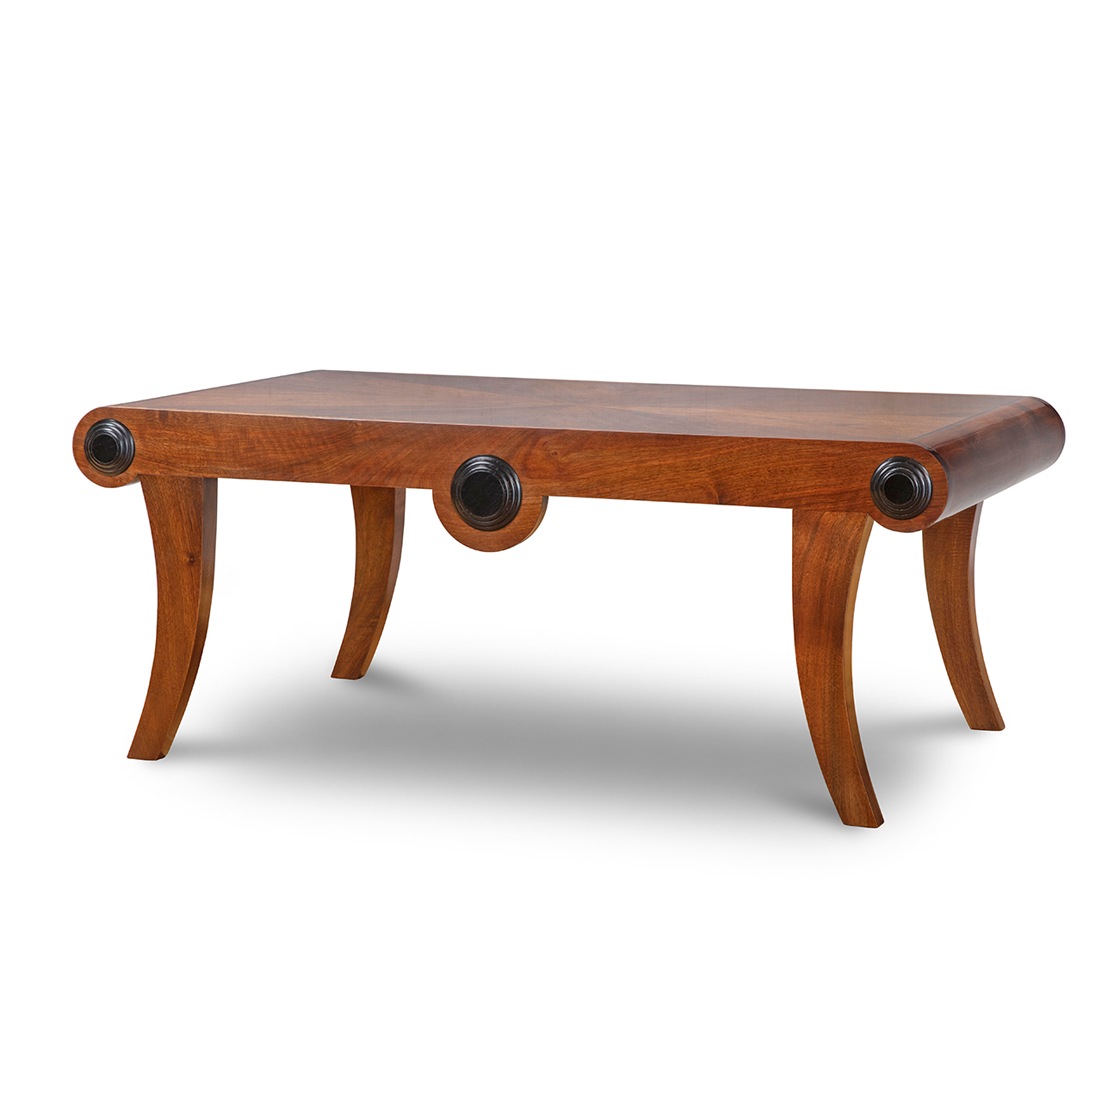 Duke coffee table with inlays - Beaumont & Fletcher